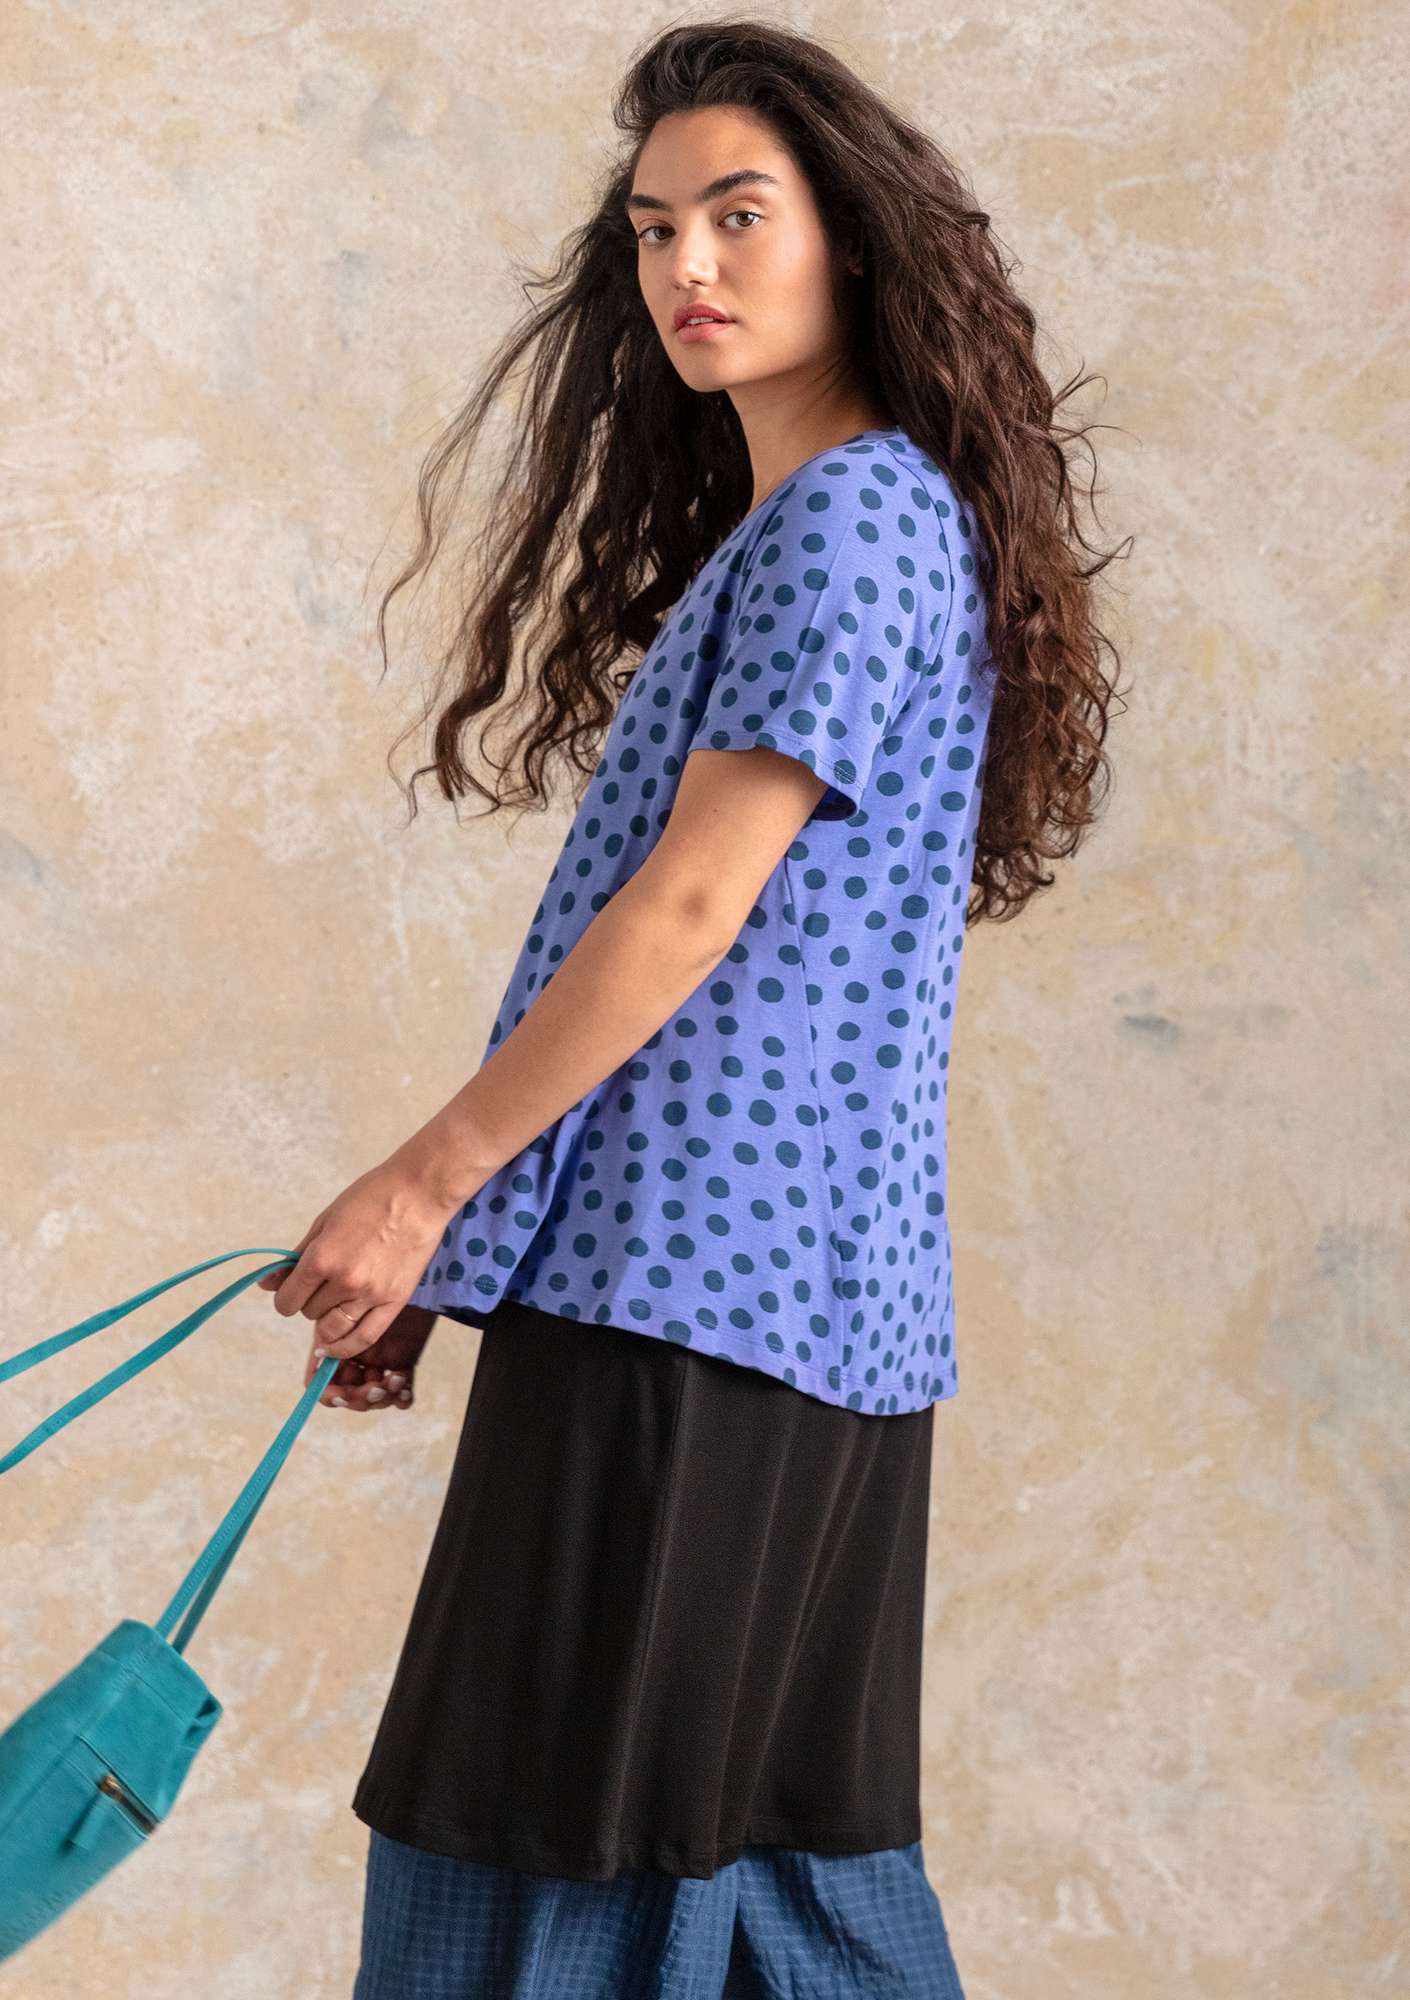 “Cordelia” top in organic cotton/modal sky blue/patterned thumbnail